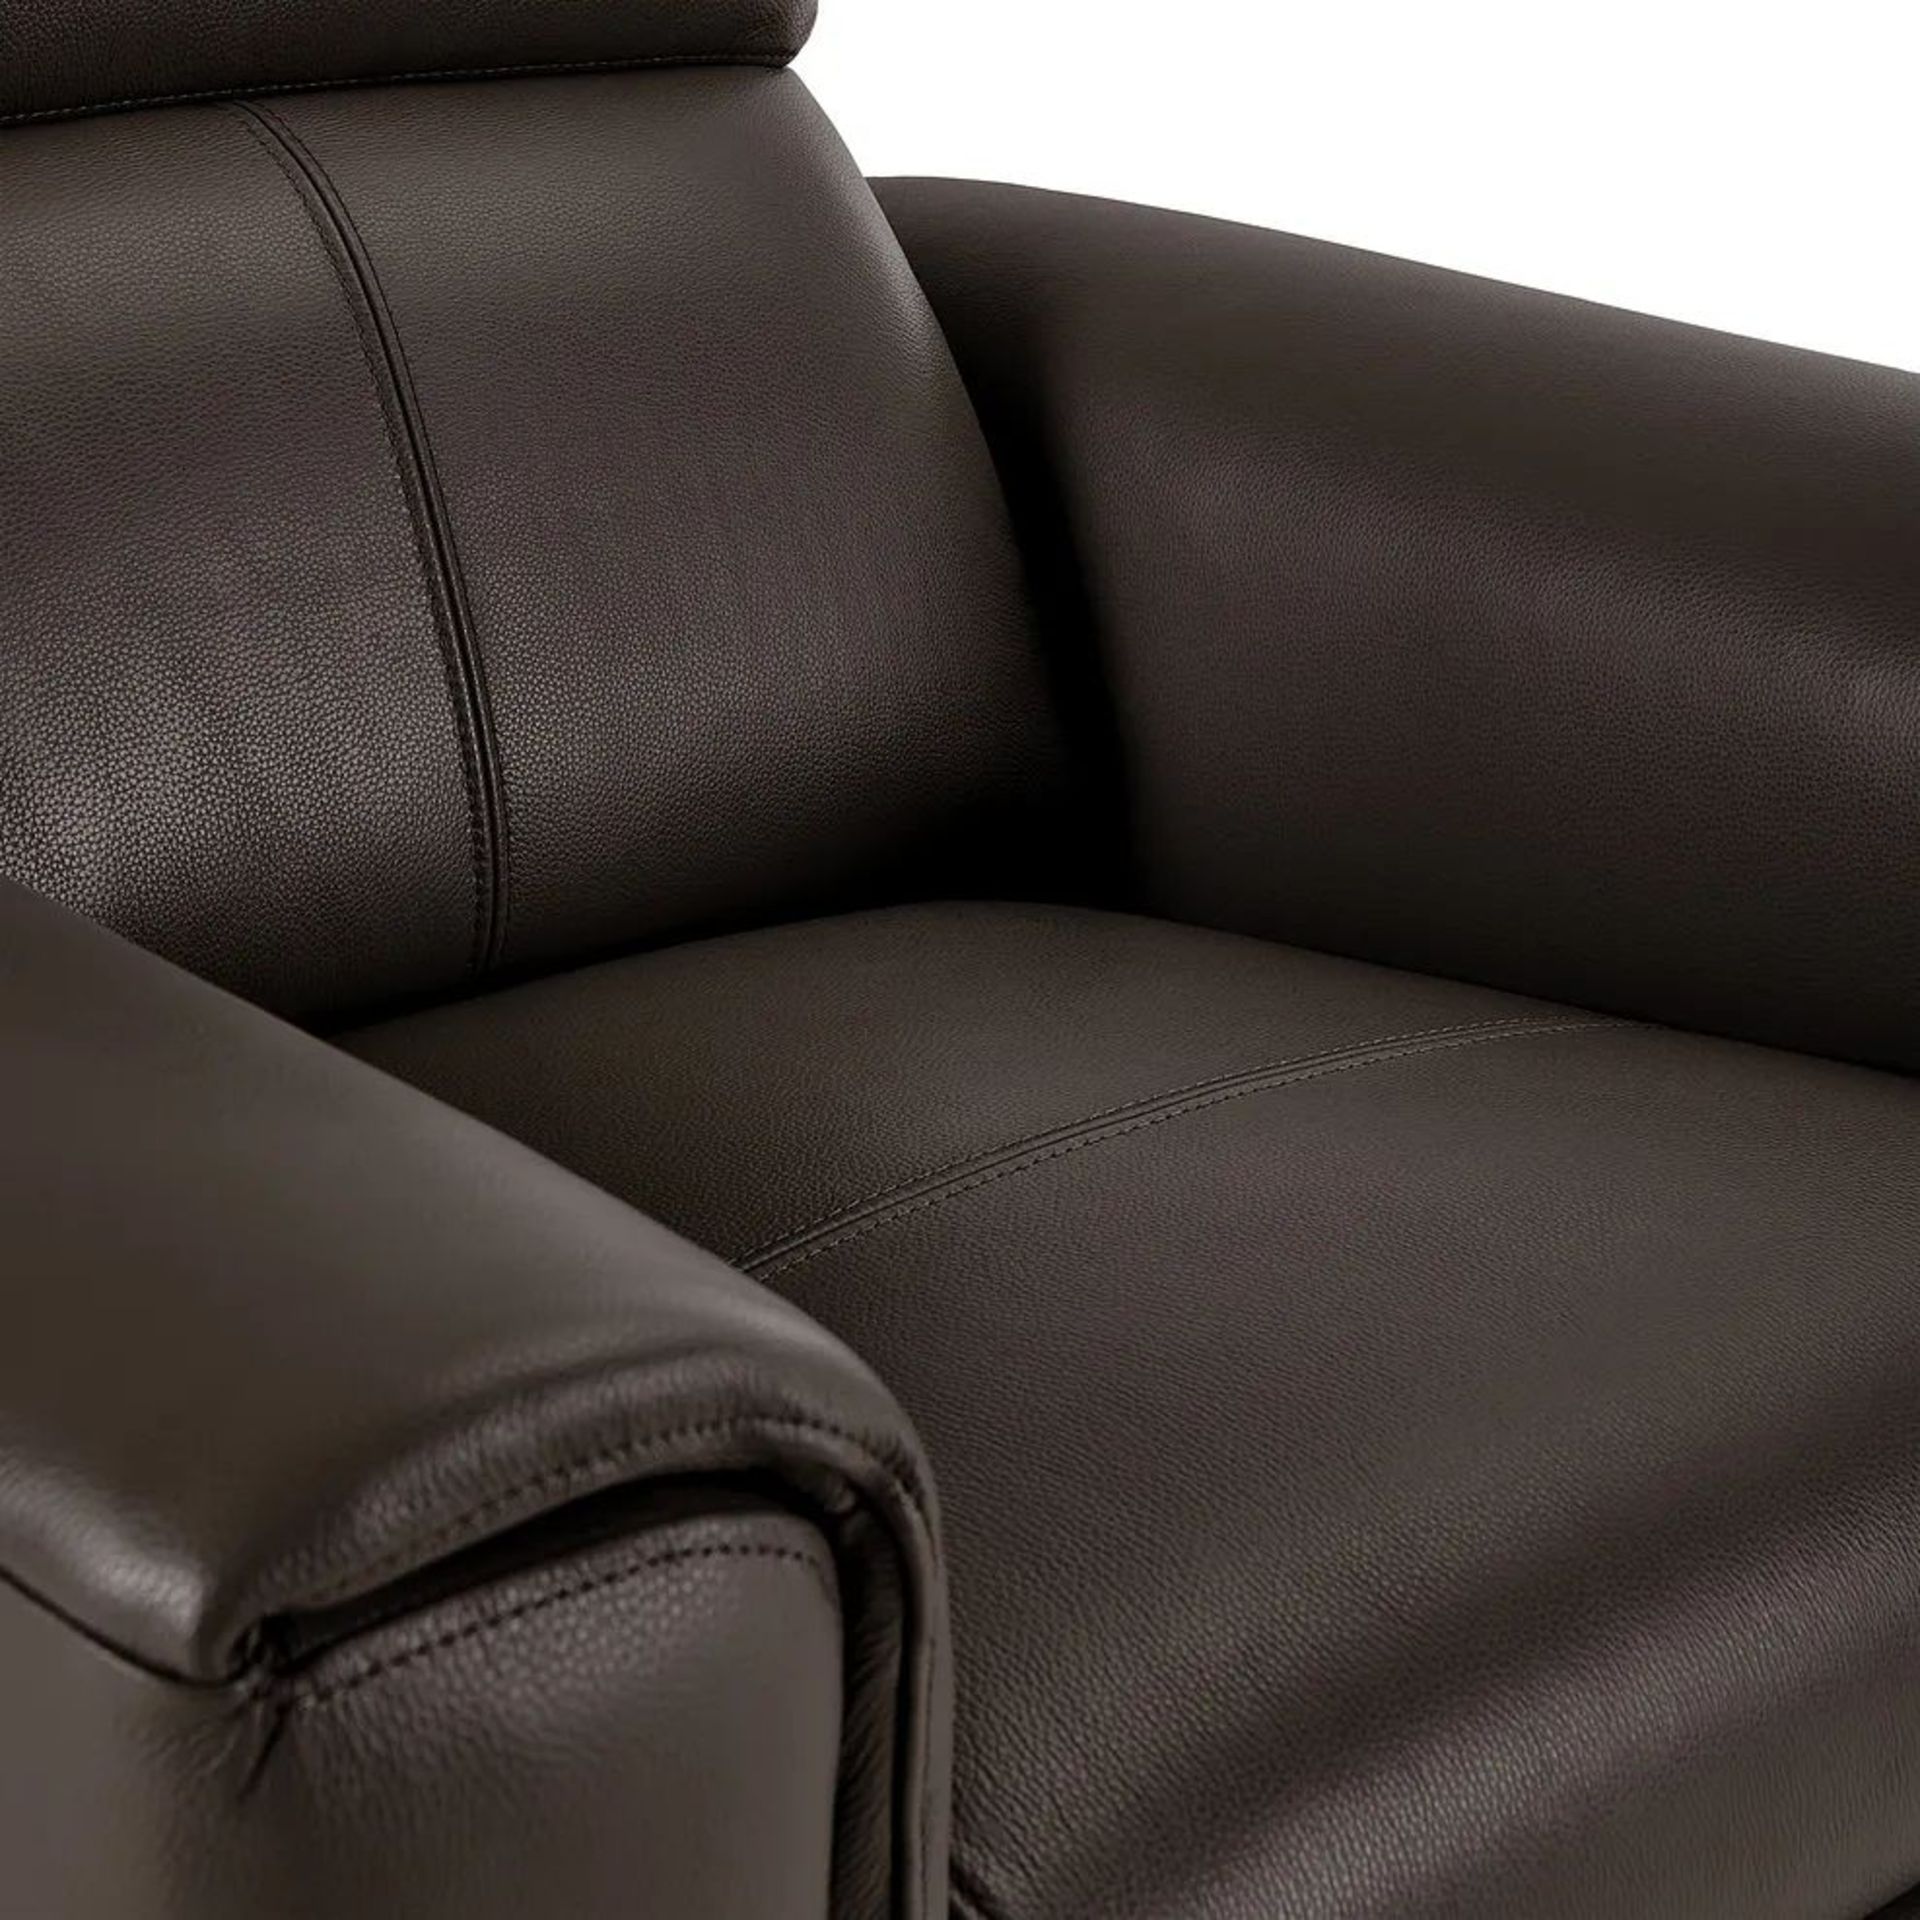 BRAND NEW SAMSON Electric Recliner Armchair - TWO TONE BROWN LEATHER. RRP £1249. Showcasing neat, - Image 9 of 9